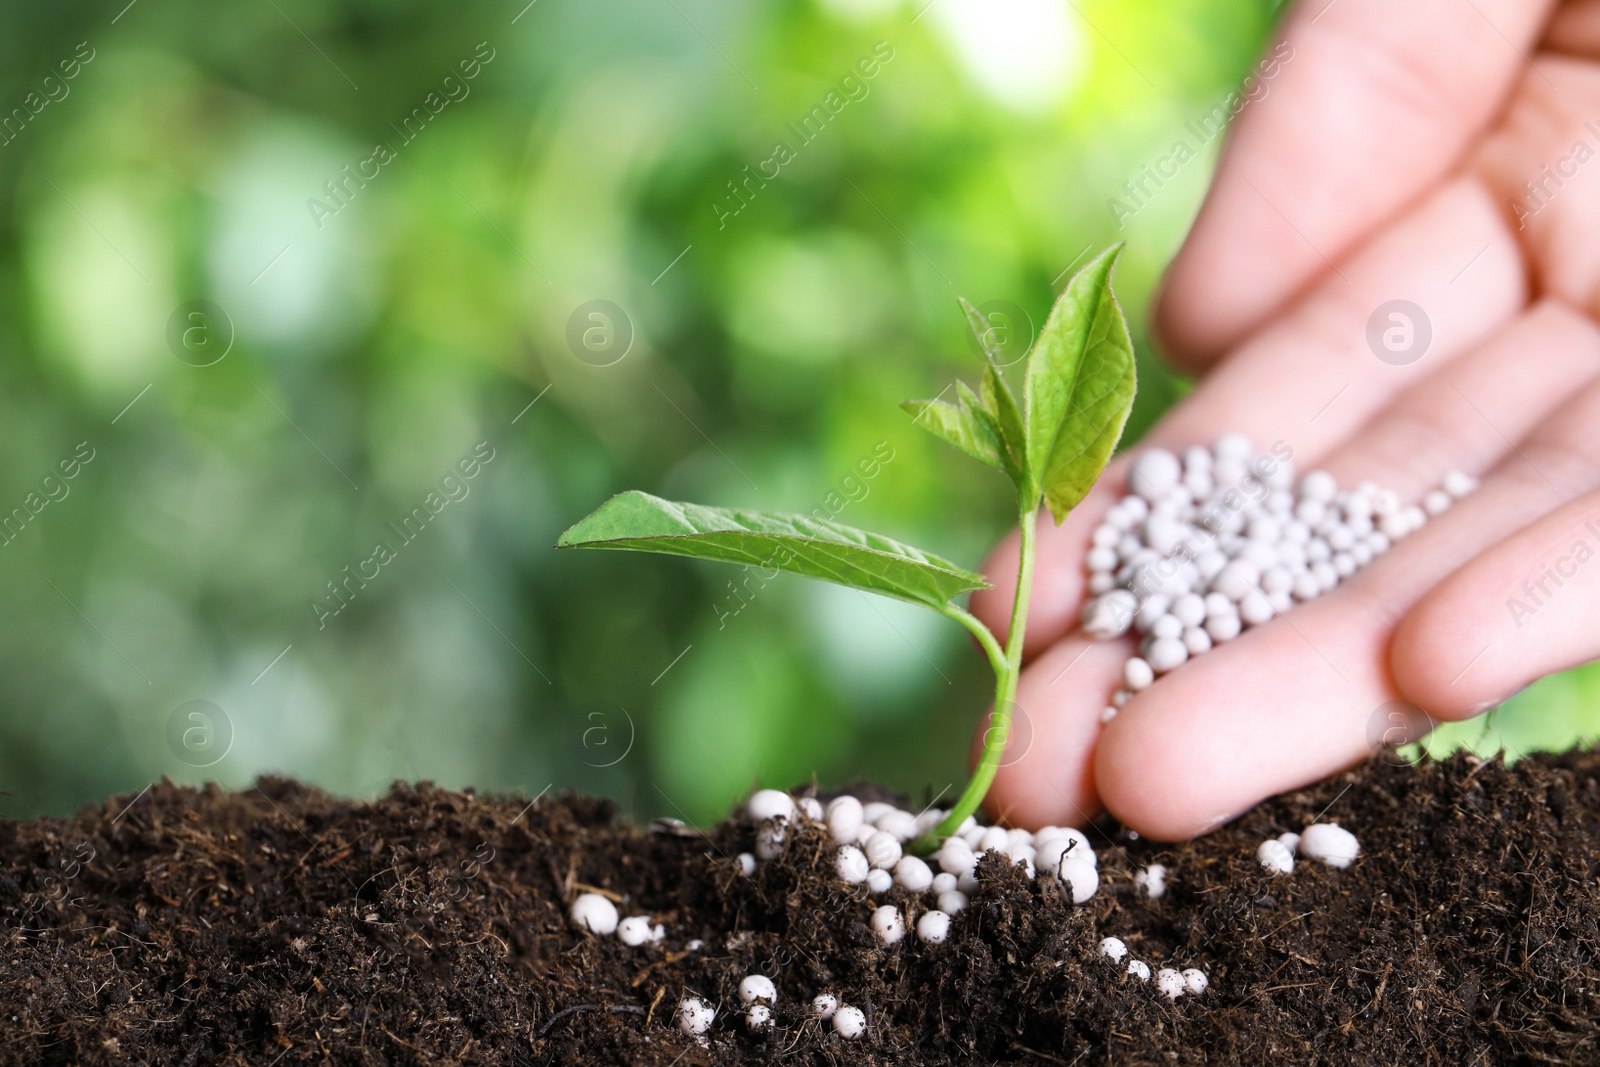 Photo of Woman fertilizing plant in soil against blurred background, closeup with space for text. Gardening time